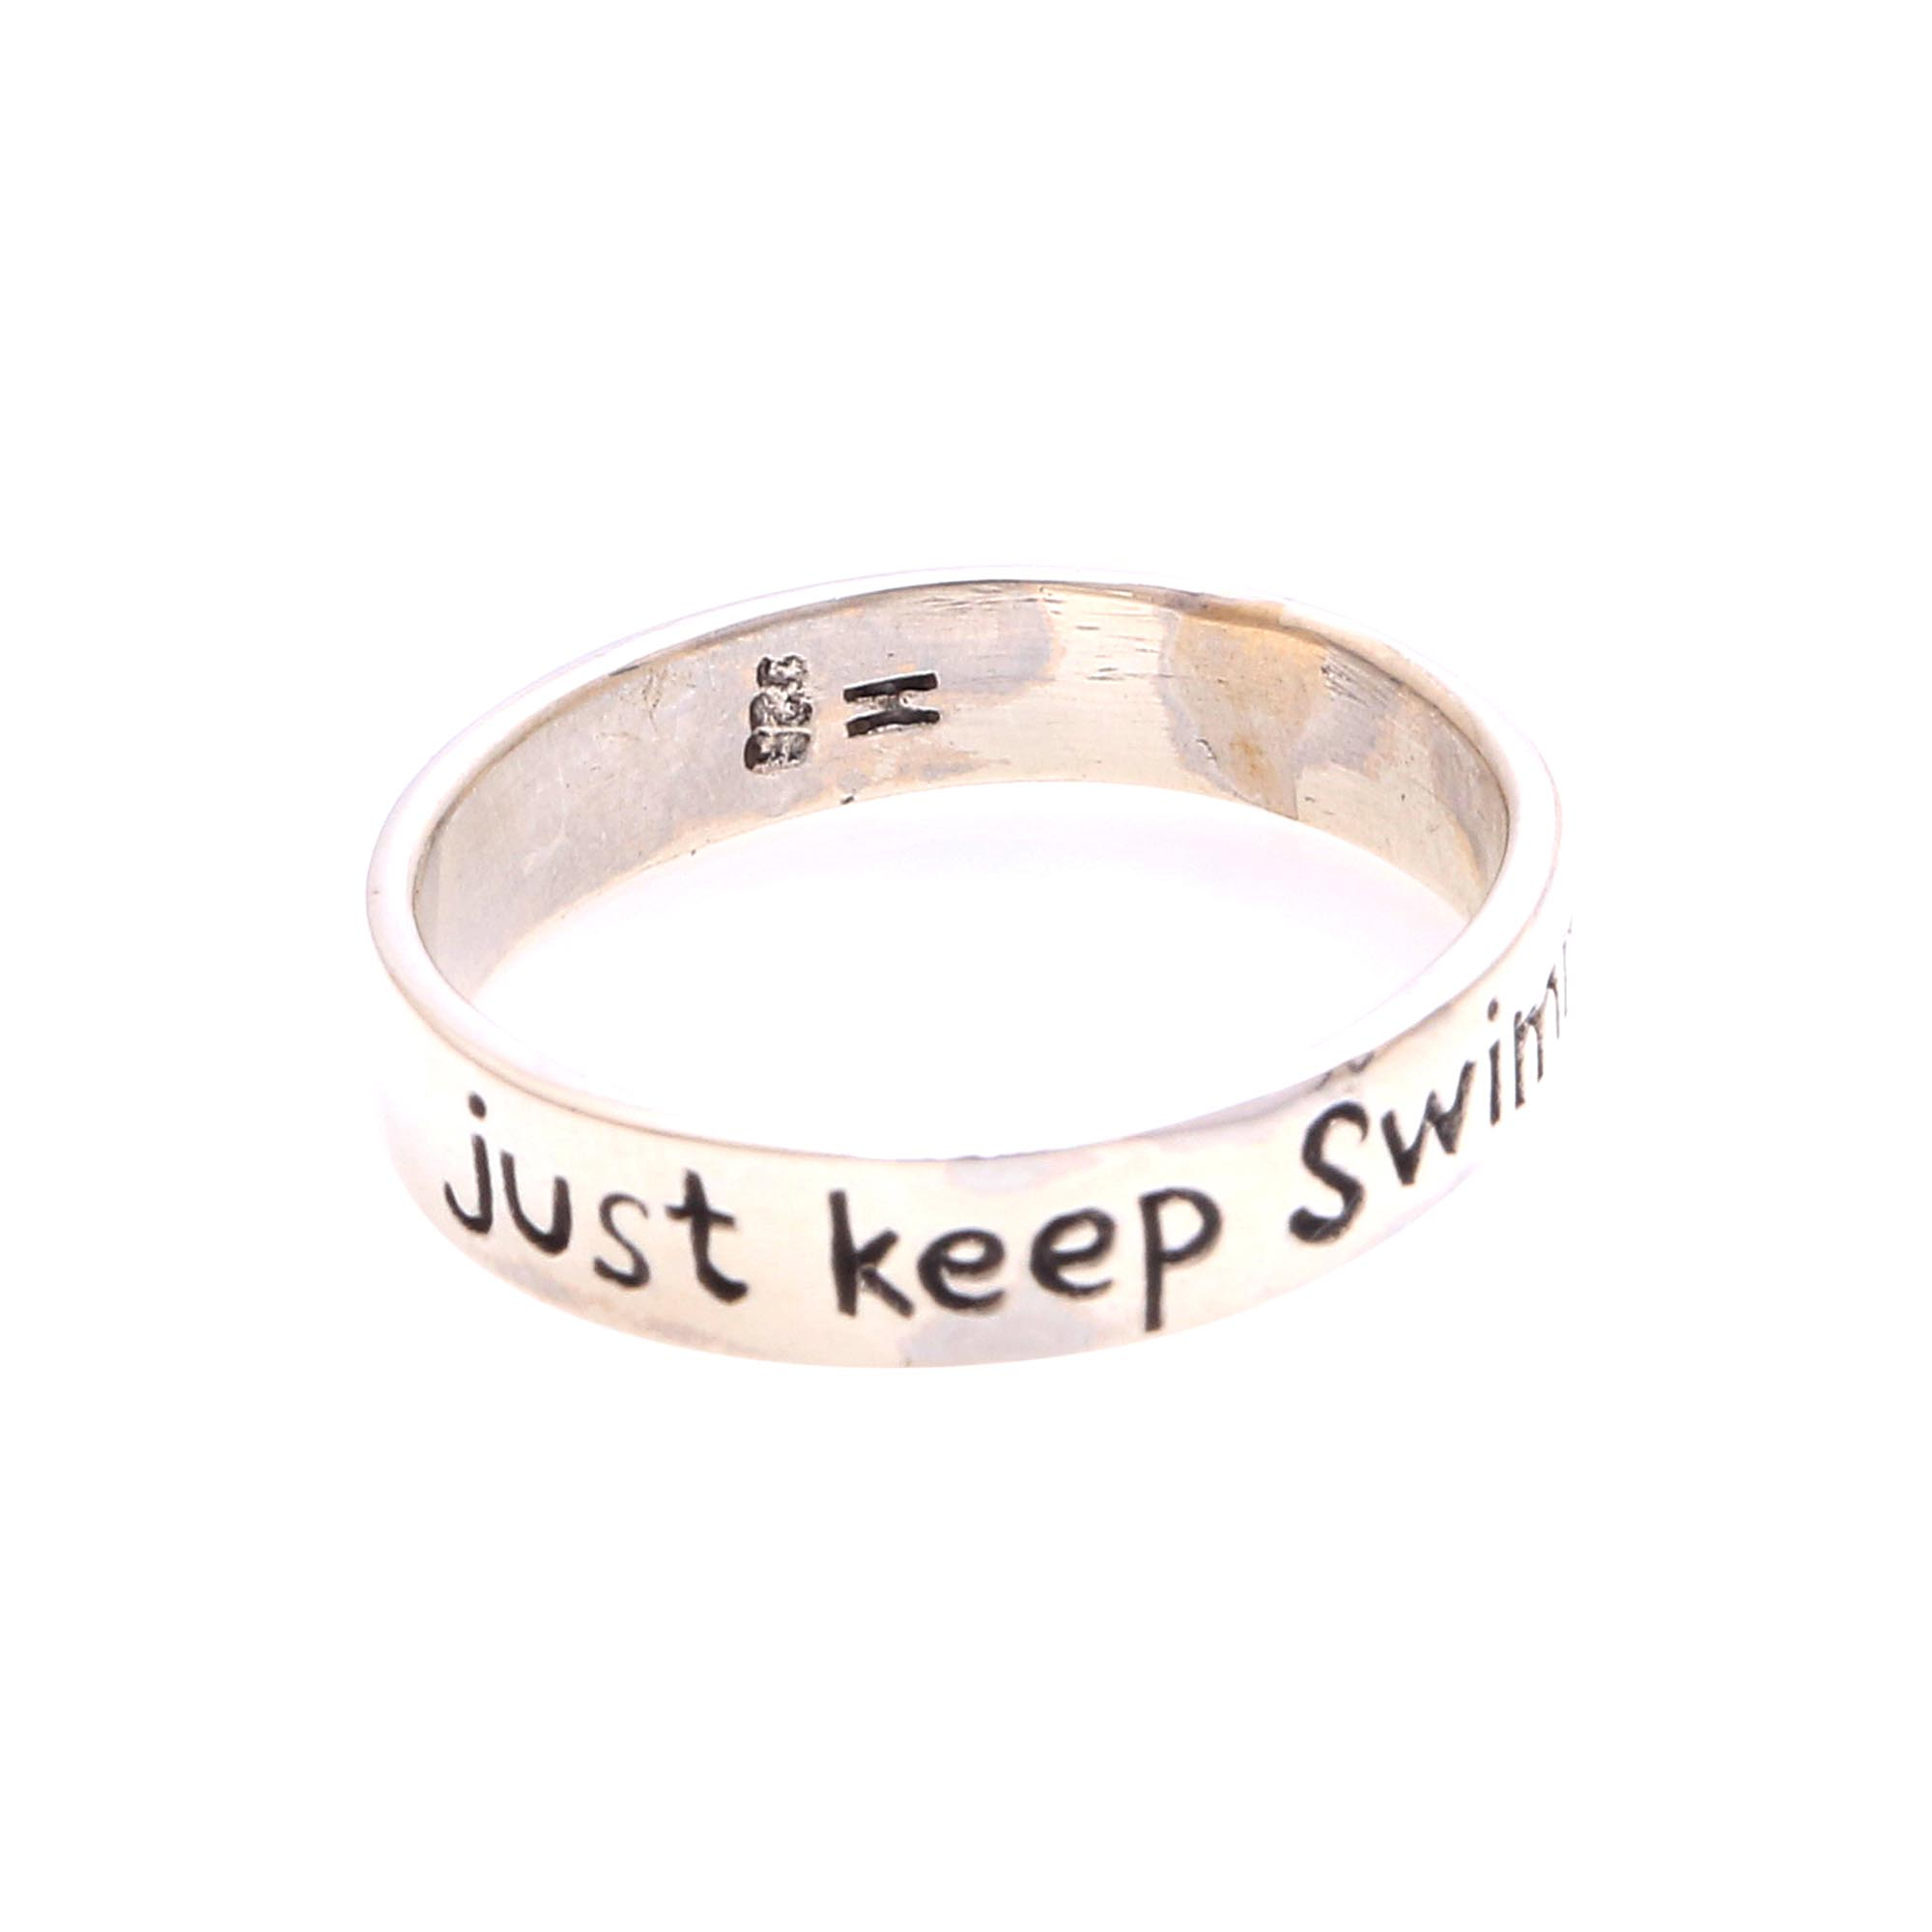 Inspirational Sterling Silver Band Ring from Bali - Just Keep Swimming ...